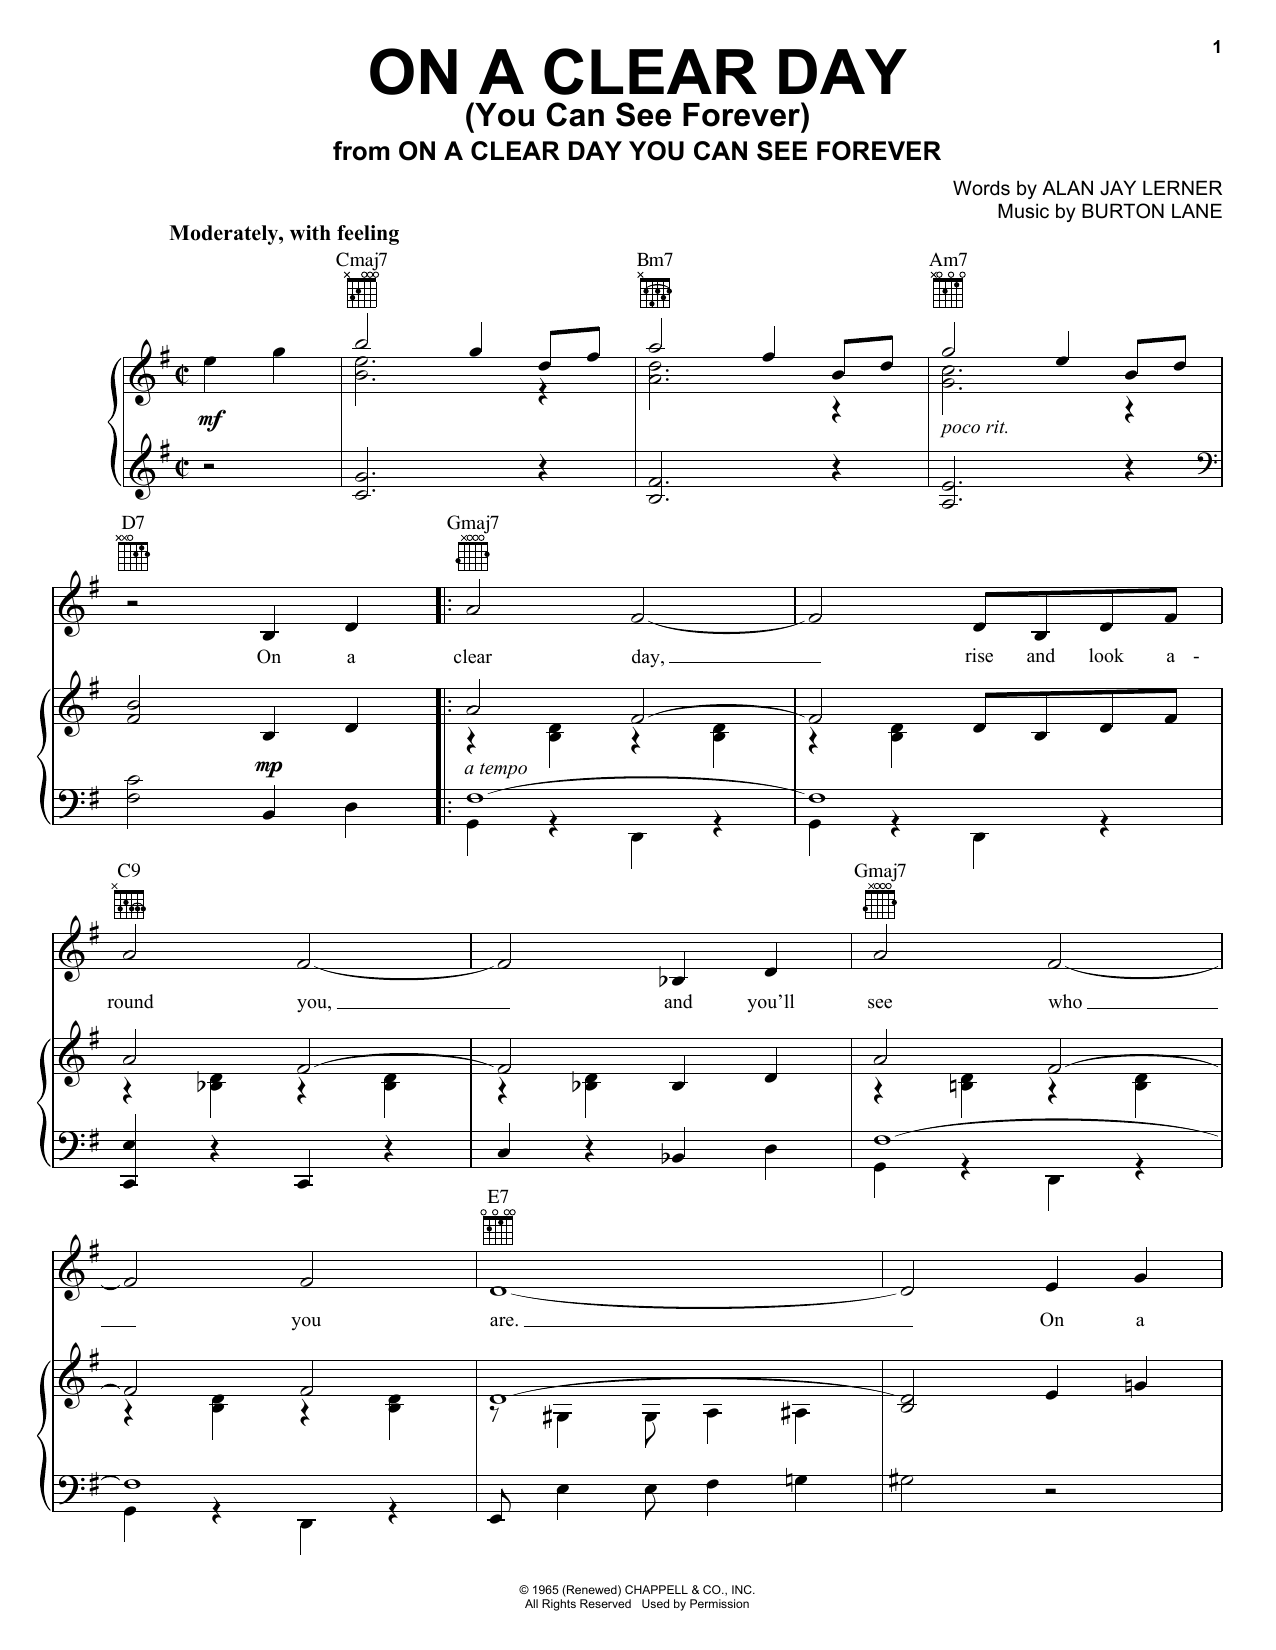 On A Clear Day (You Can See Forever) sheet music